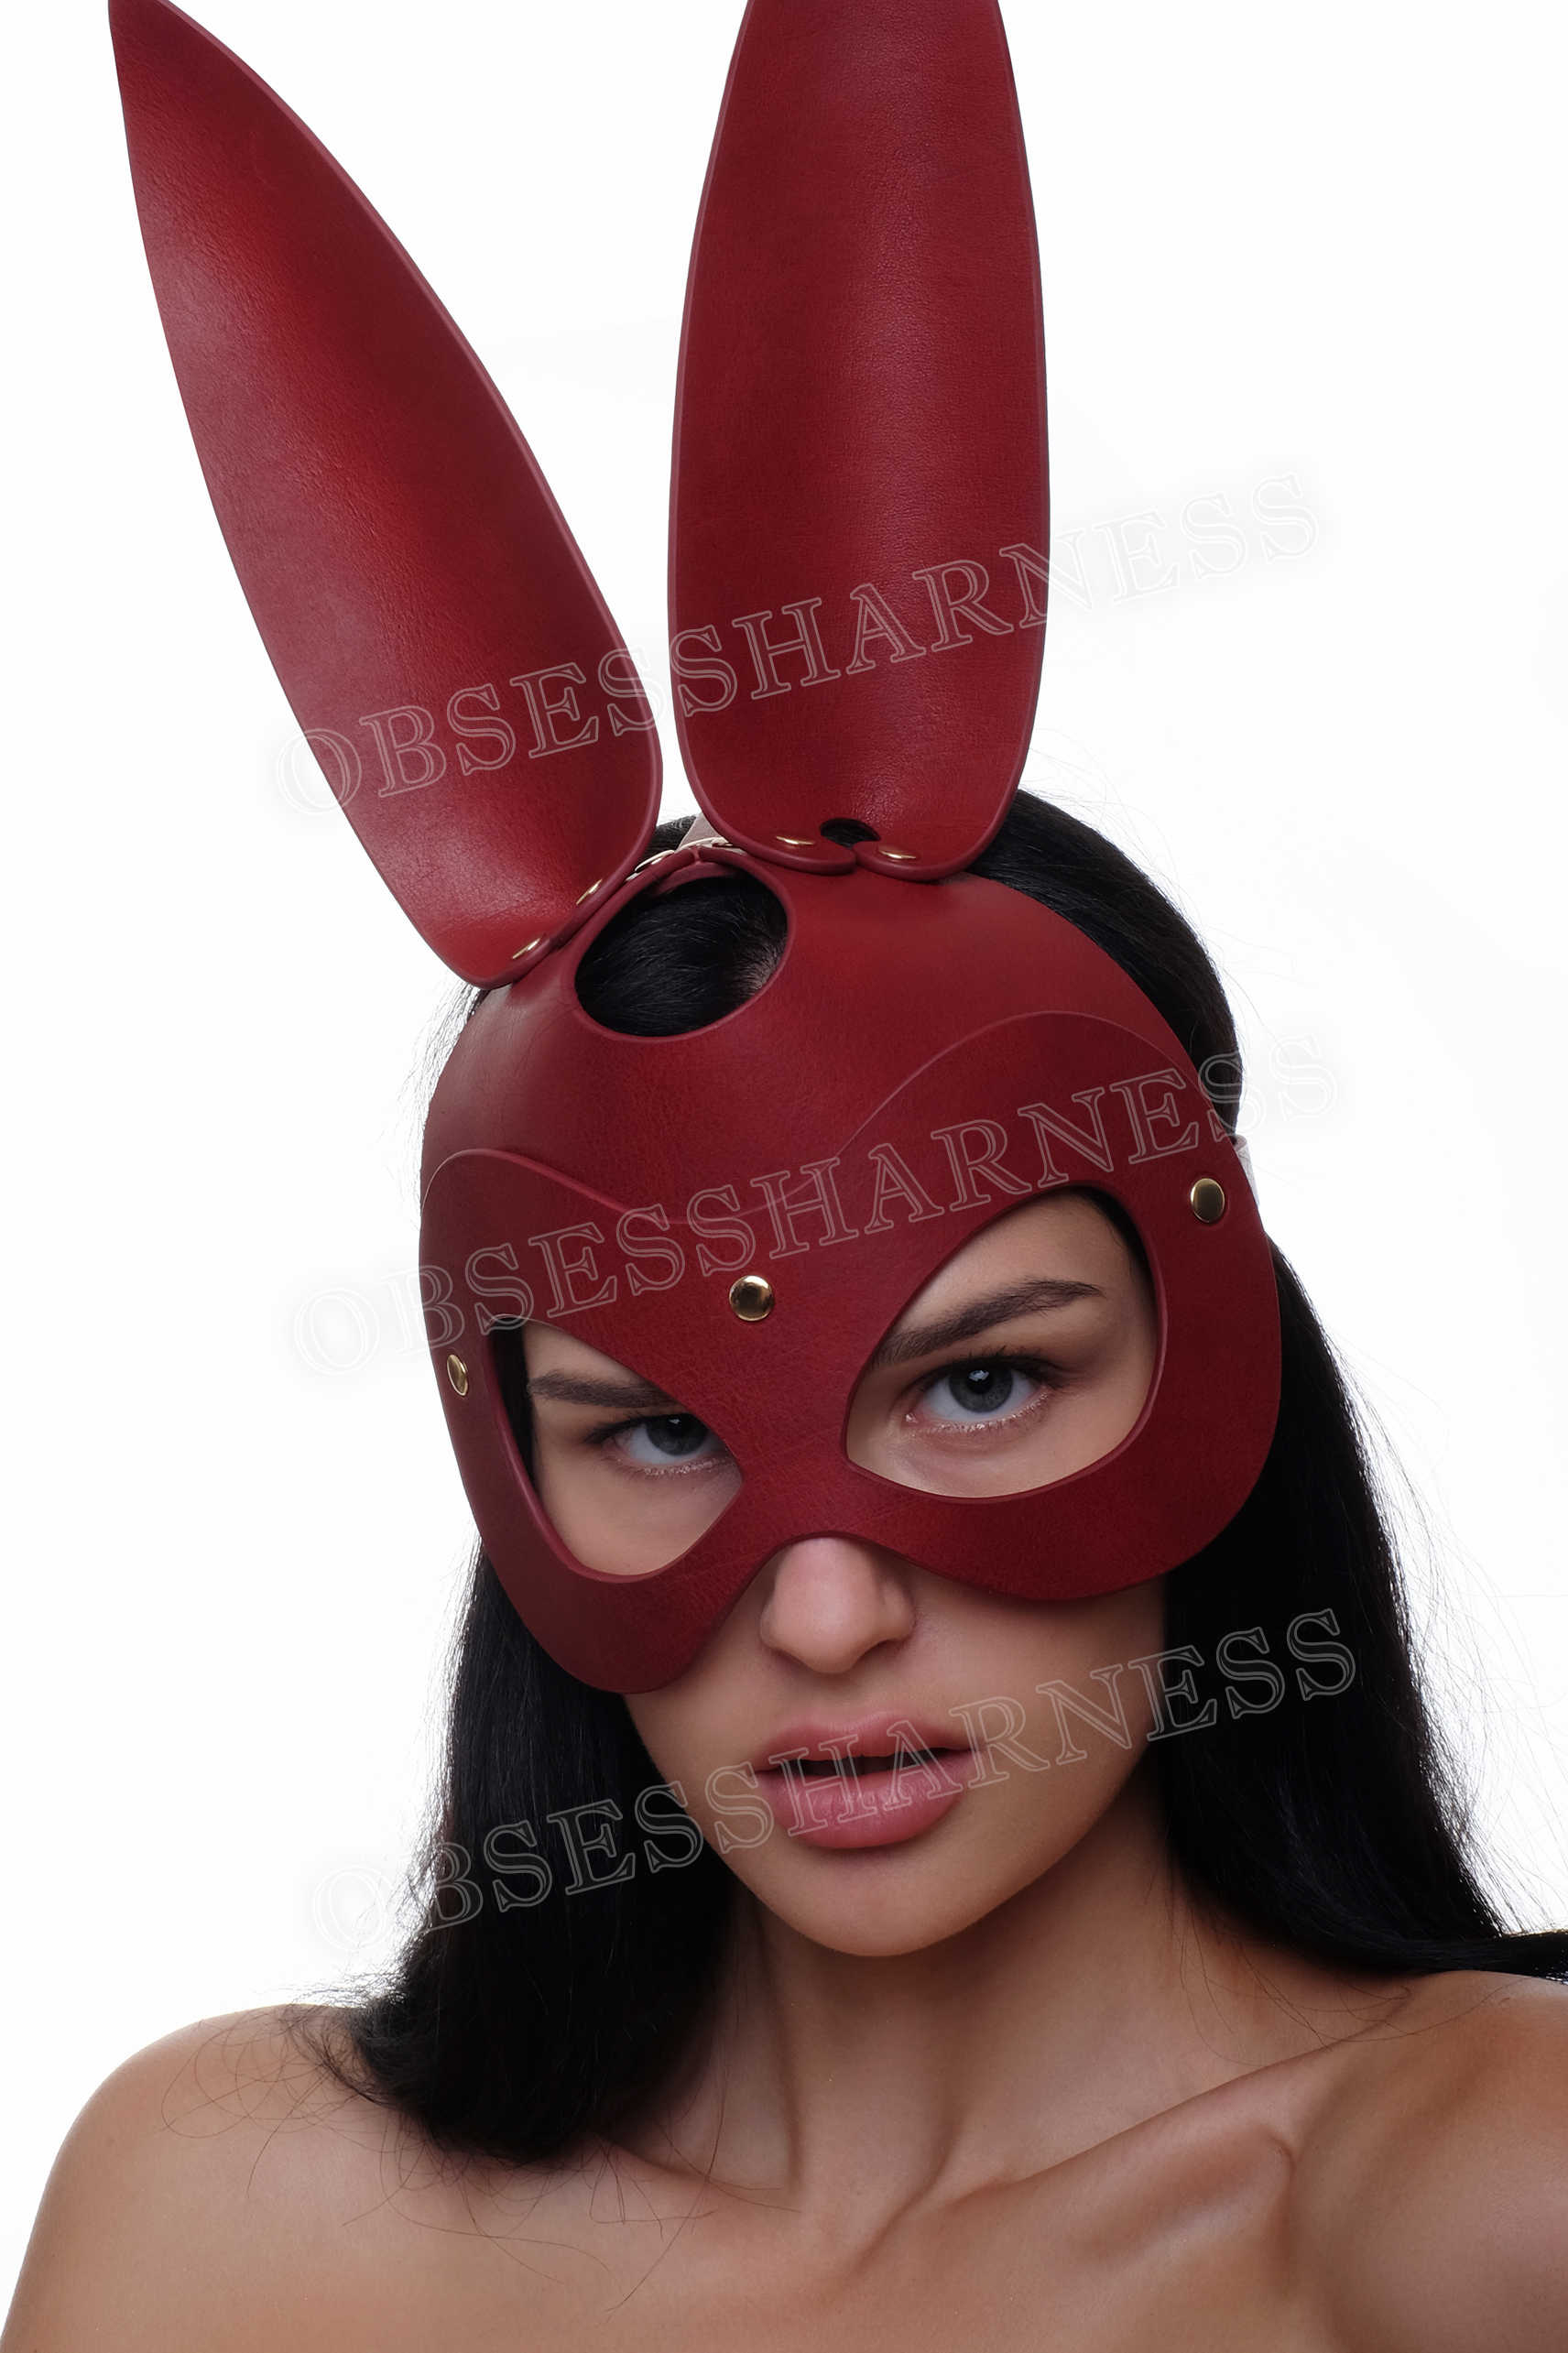 Bunny cosplay leather mask with long playboy bunny ears and cutouts for eyes - Obsessharness